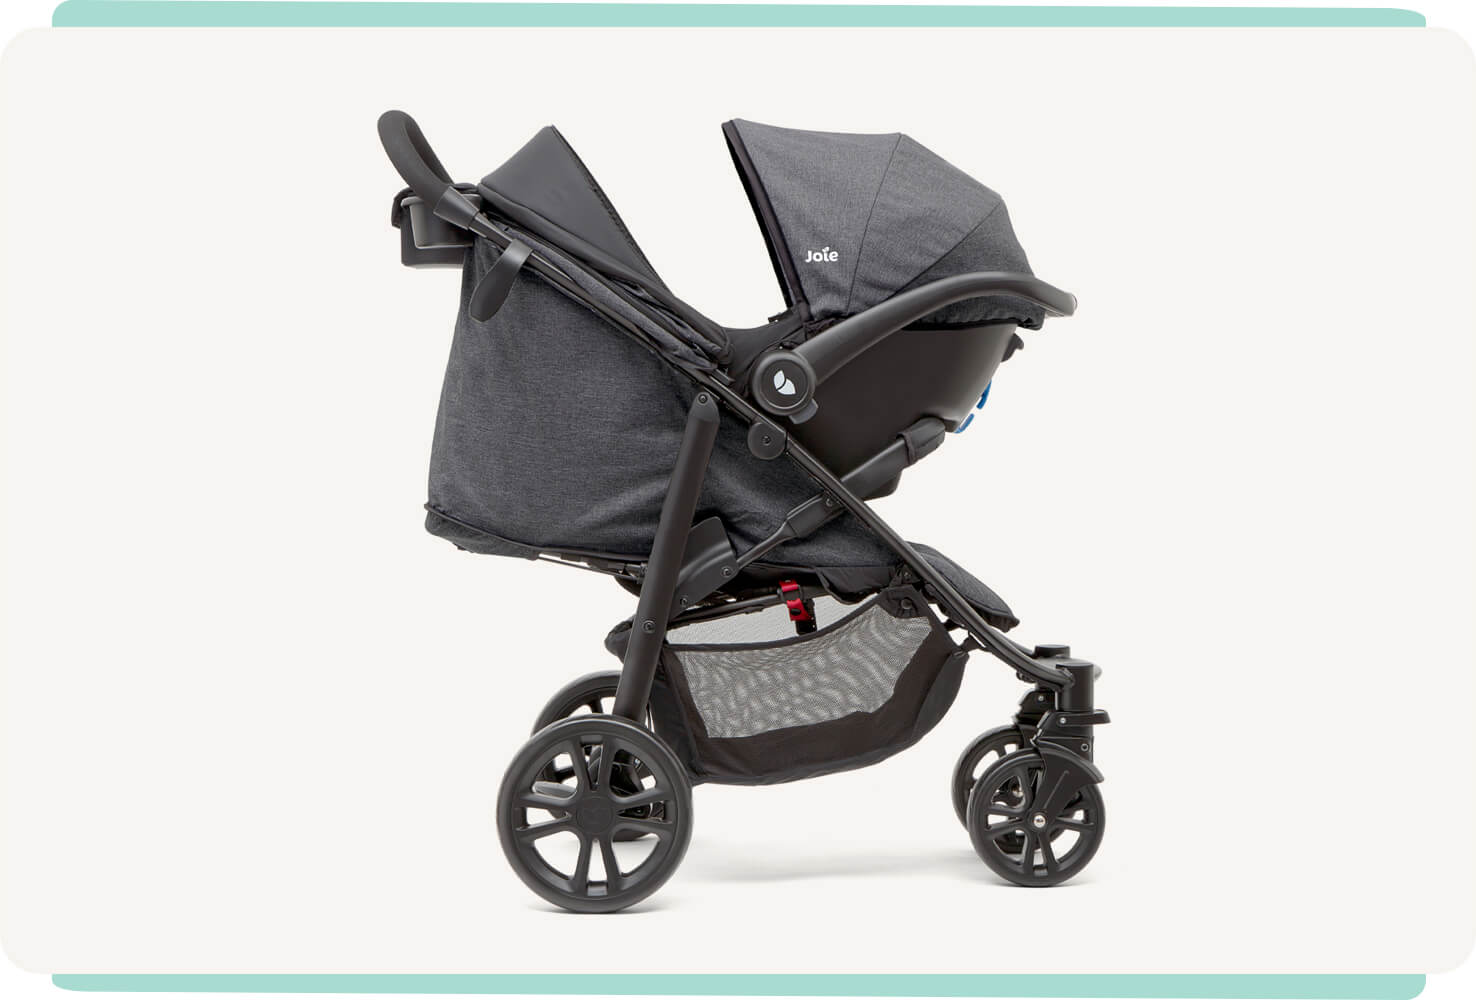   A black Joie Litetrax 4 travel system with the infant car seat attached to the stroller, facing toward the right in profile.